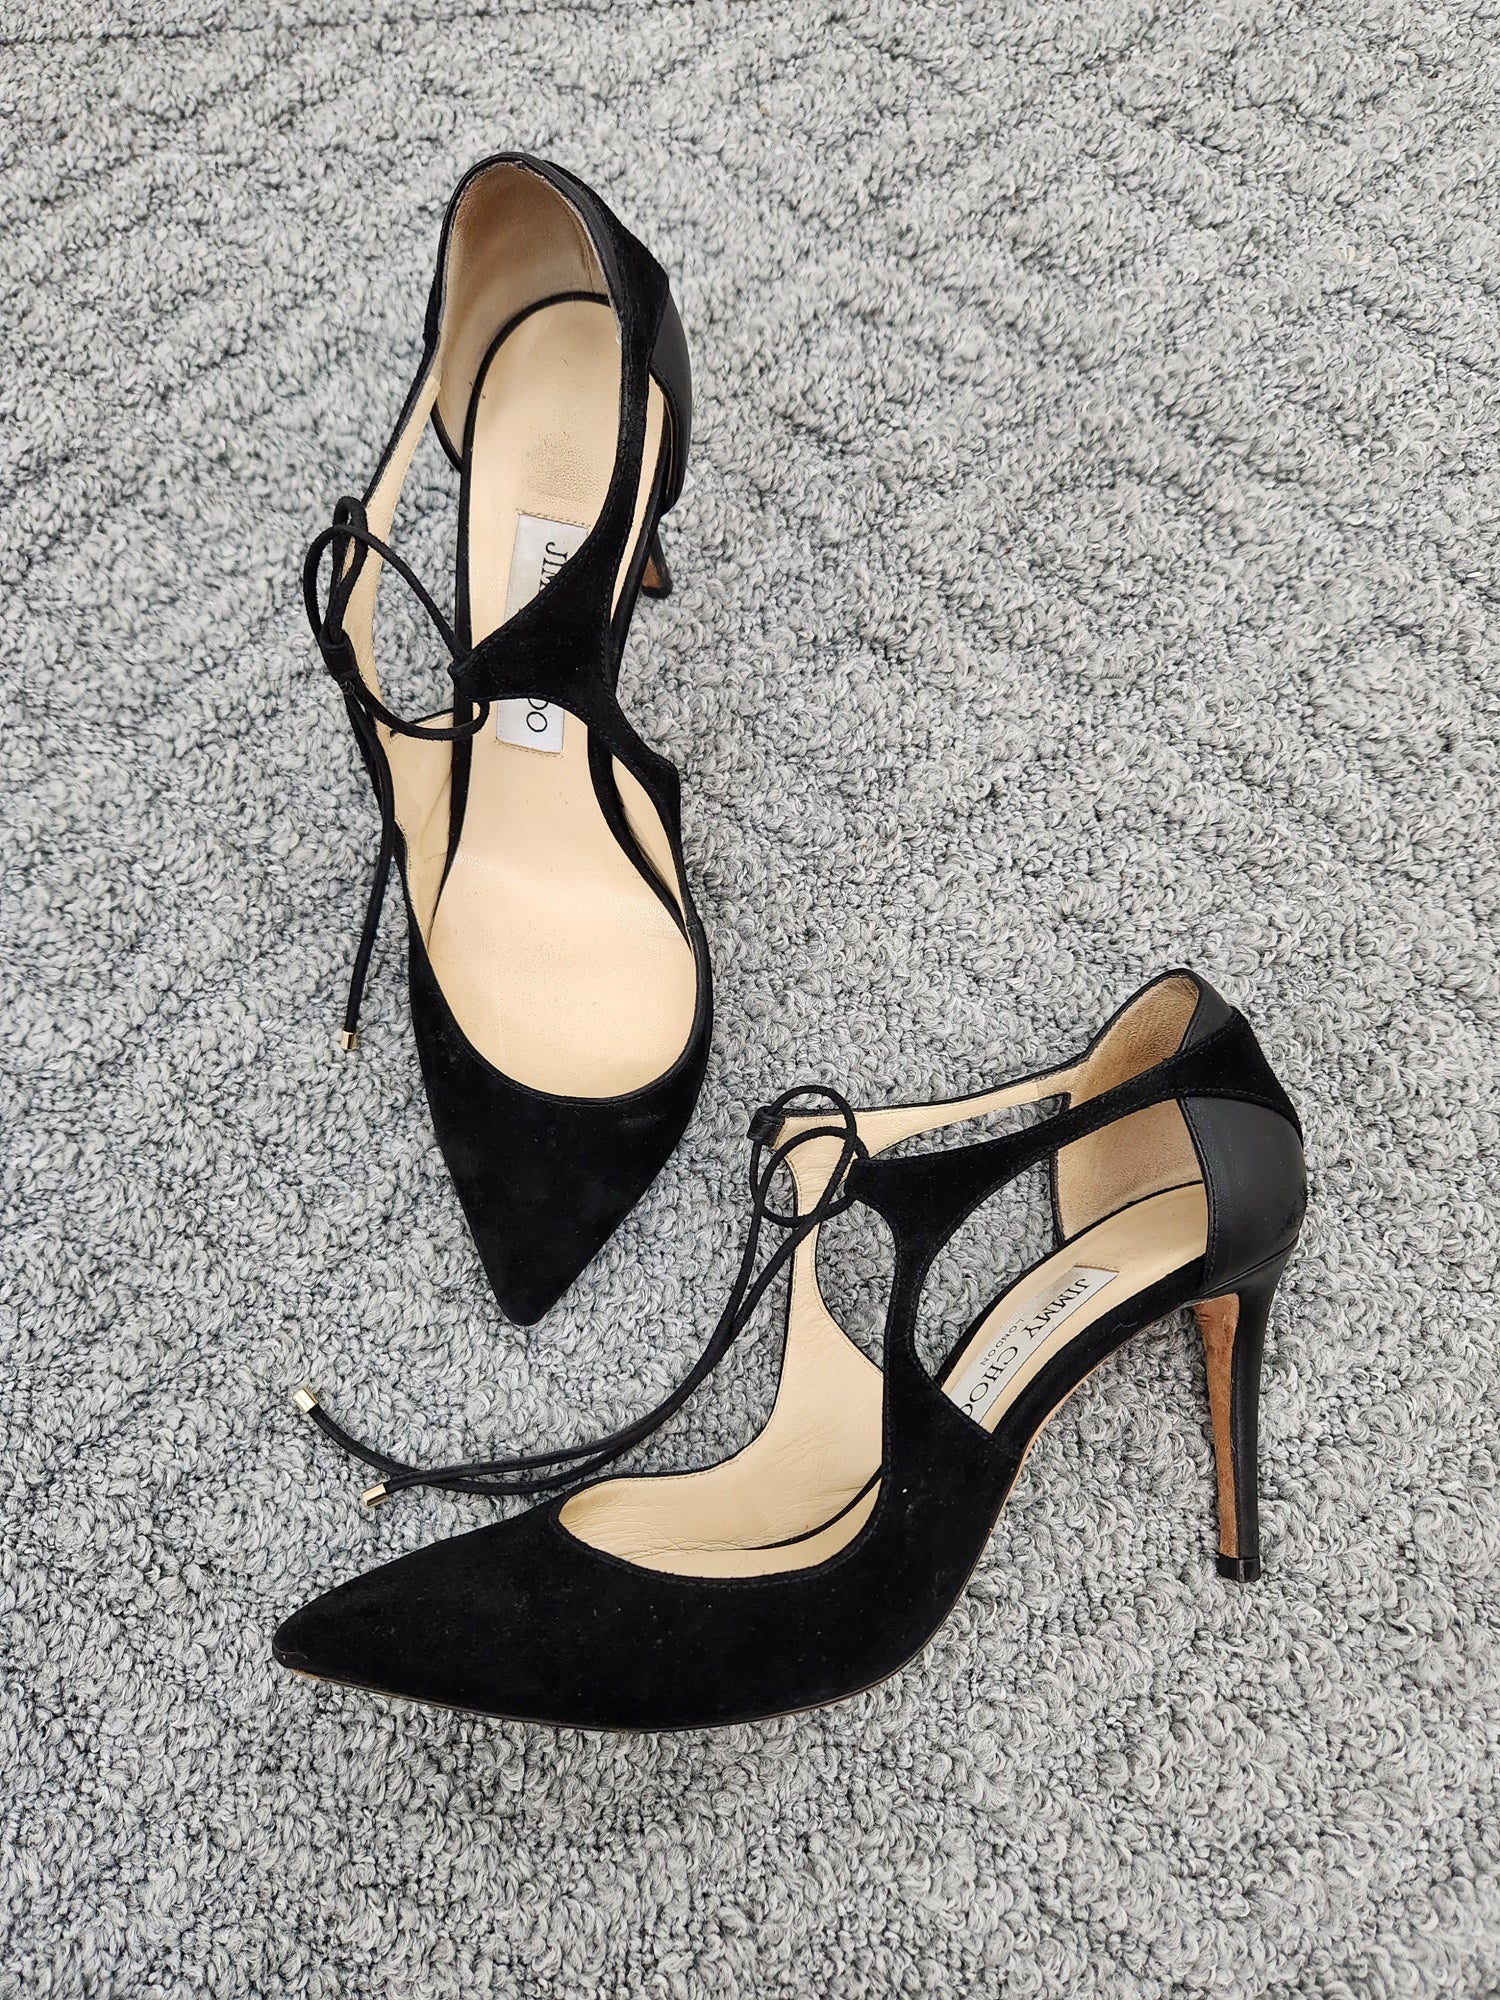 Lace Up Pointed Toe Heels Size 37.5